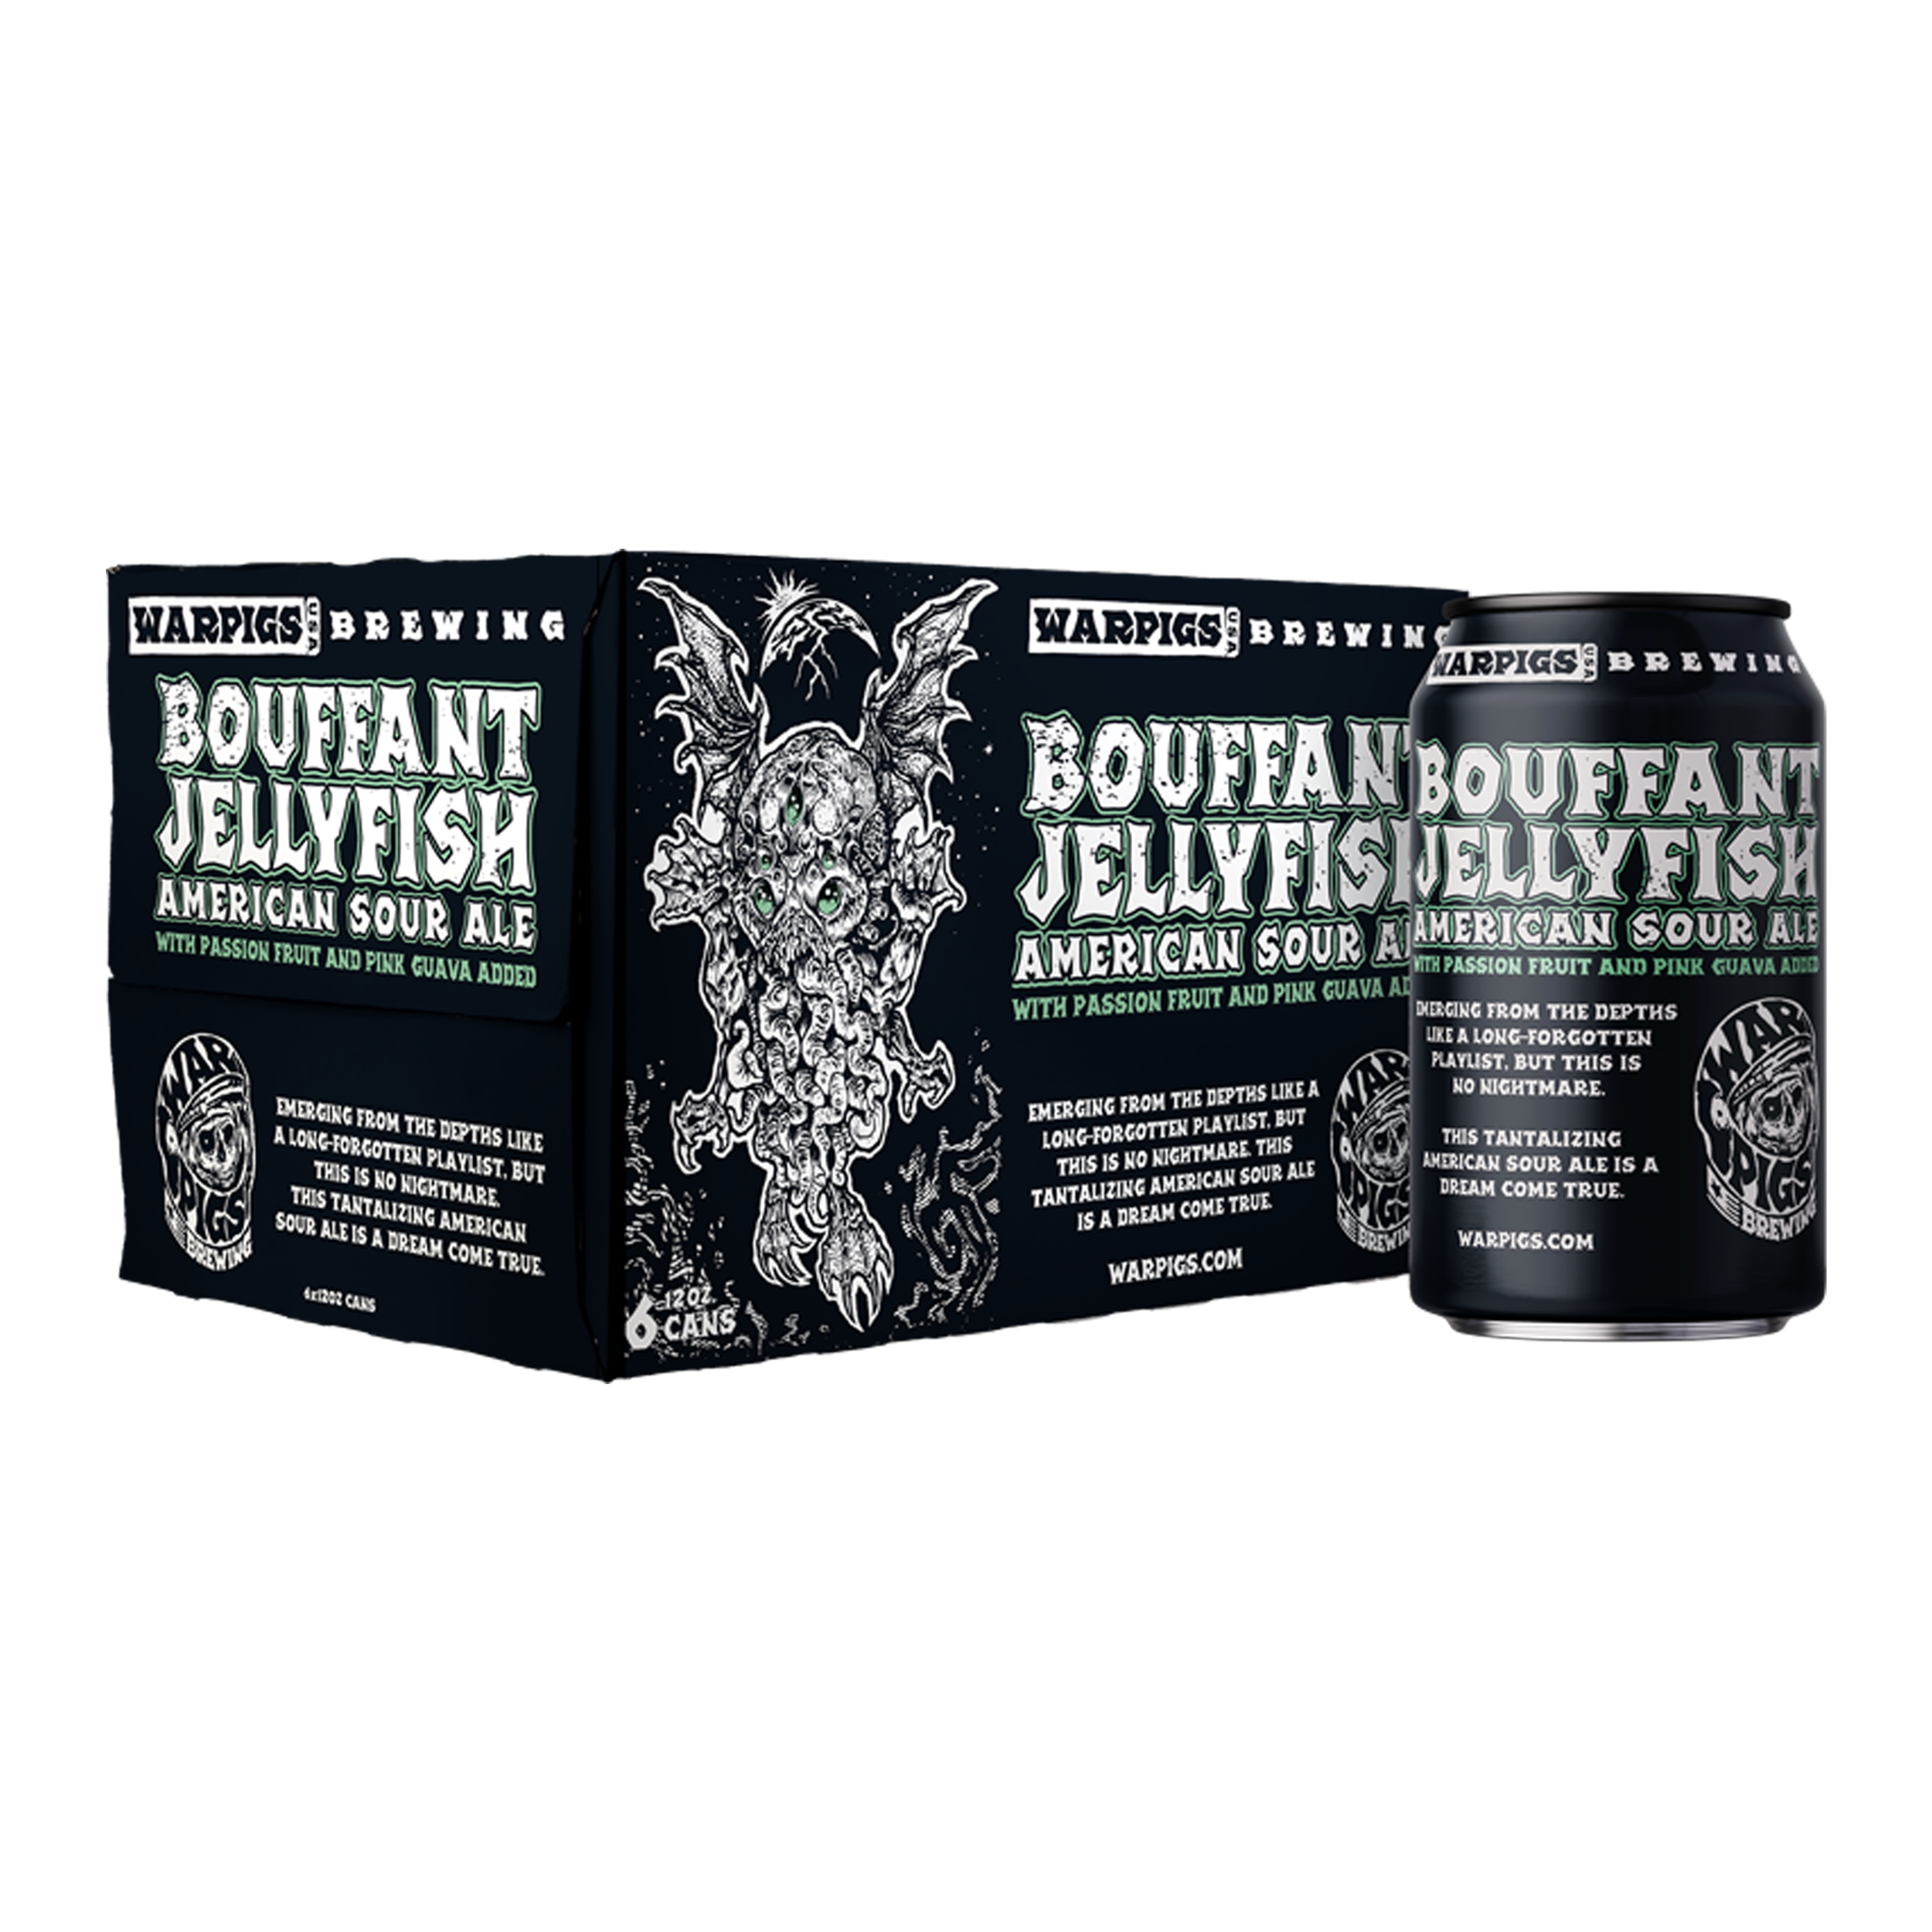 WarPigs Bouffant Jellyfish 12oz Cans – PICK-UP ONLY